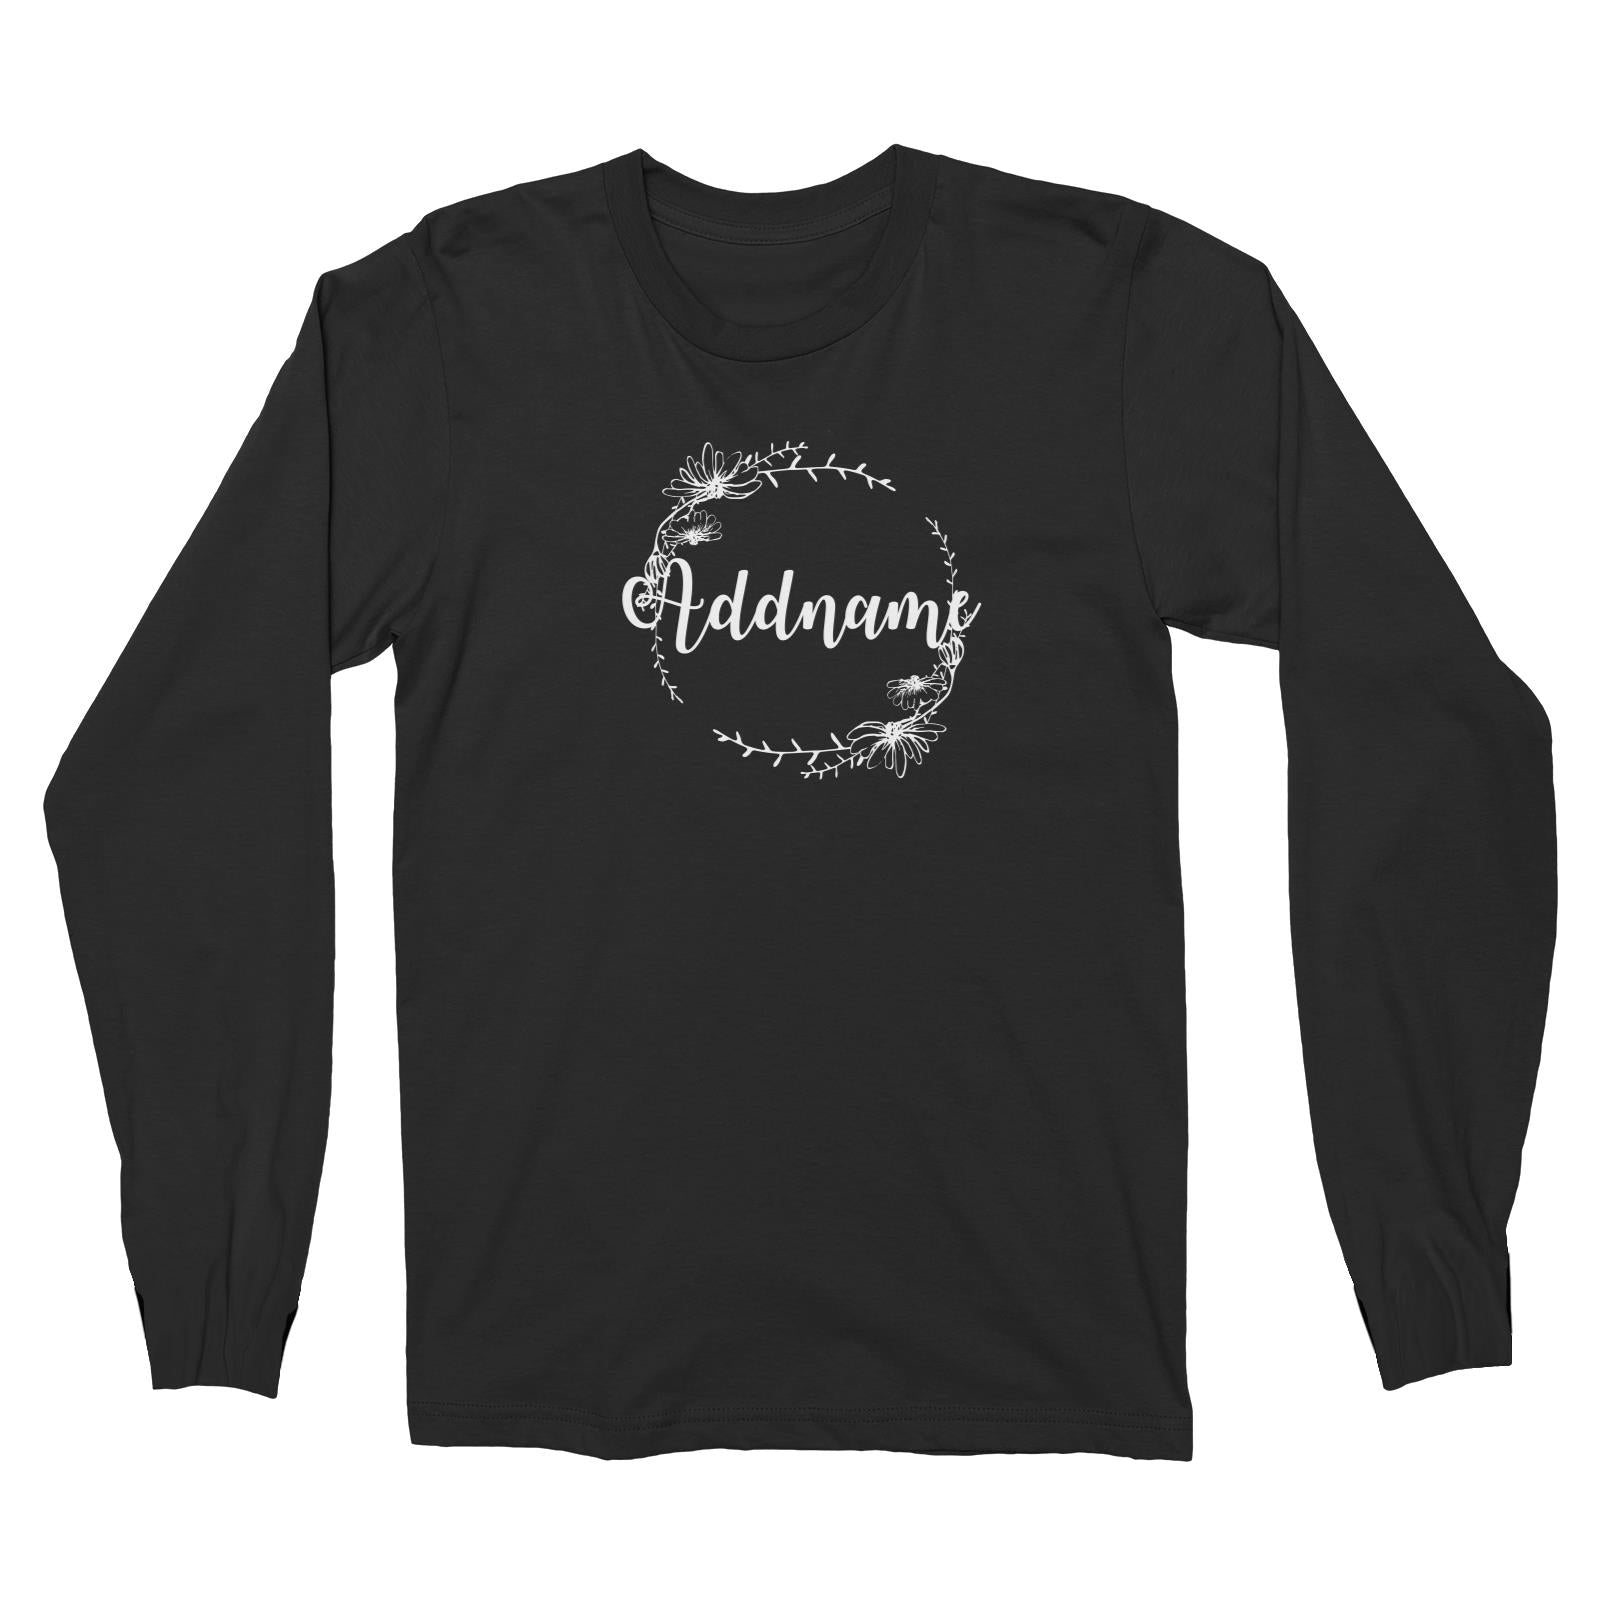 Bridesmaid Monochrome Floral and Leaves Wreath Addname Long Sleeve Unisex T-Shirt